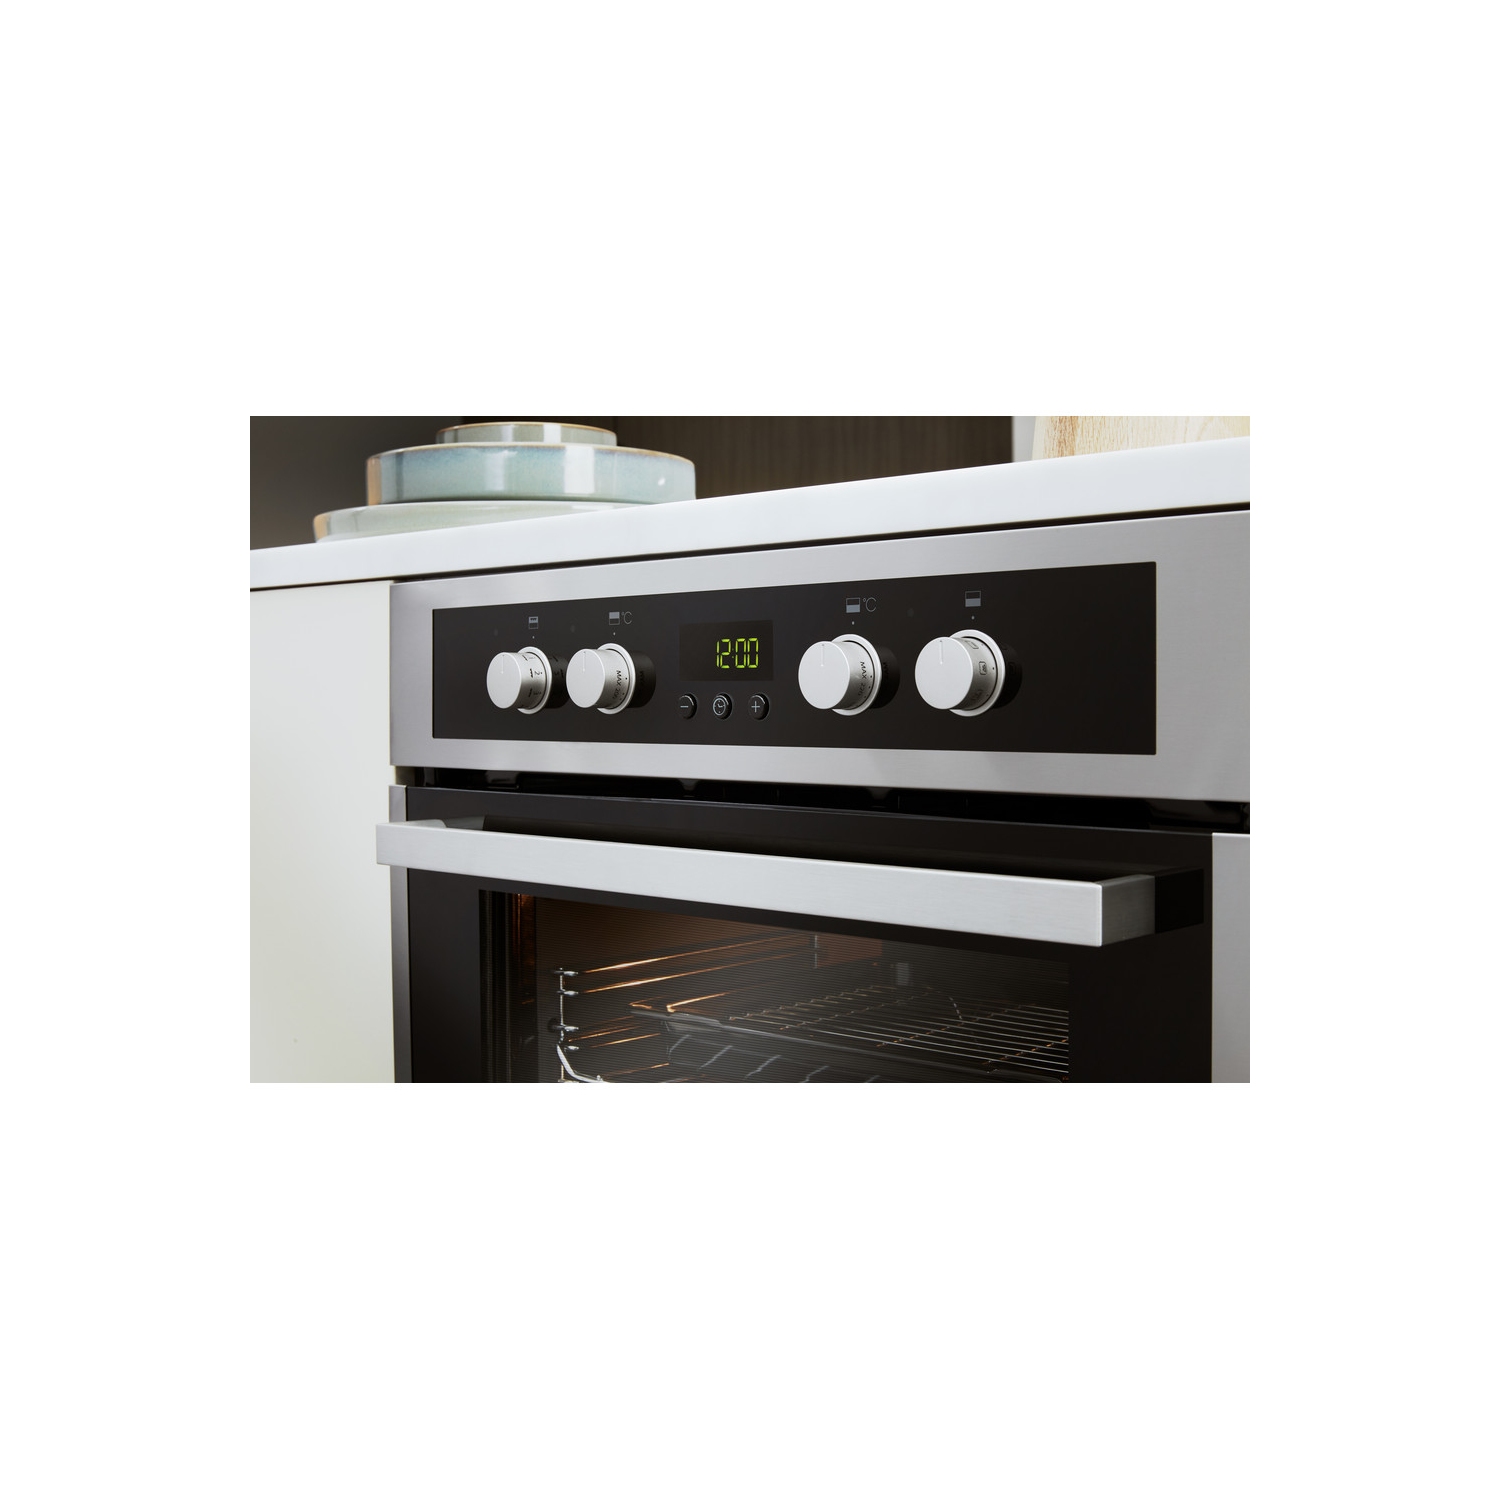 Whirlpool 60cm Built-In Electric Oven - Stainless Steel - A Rated - 1